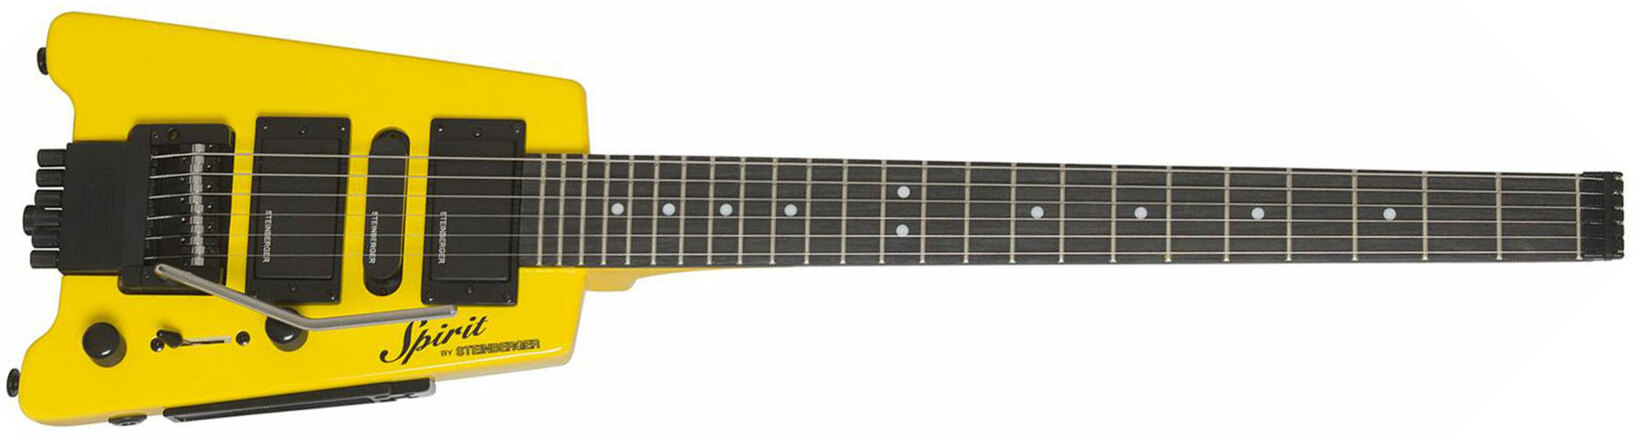 Steinberger Gt-pro Deluxe Outfit Hsh Trem Rw +housse - Hot Rod Yellow - Travel & mini electric guitar - Main picture